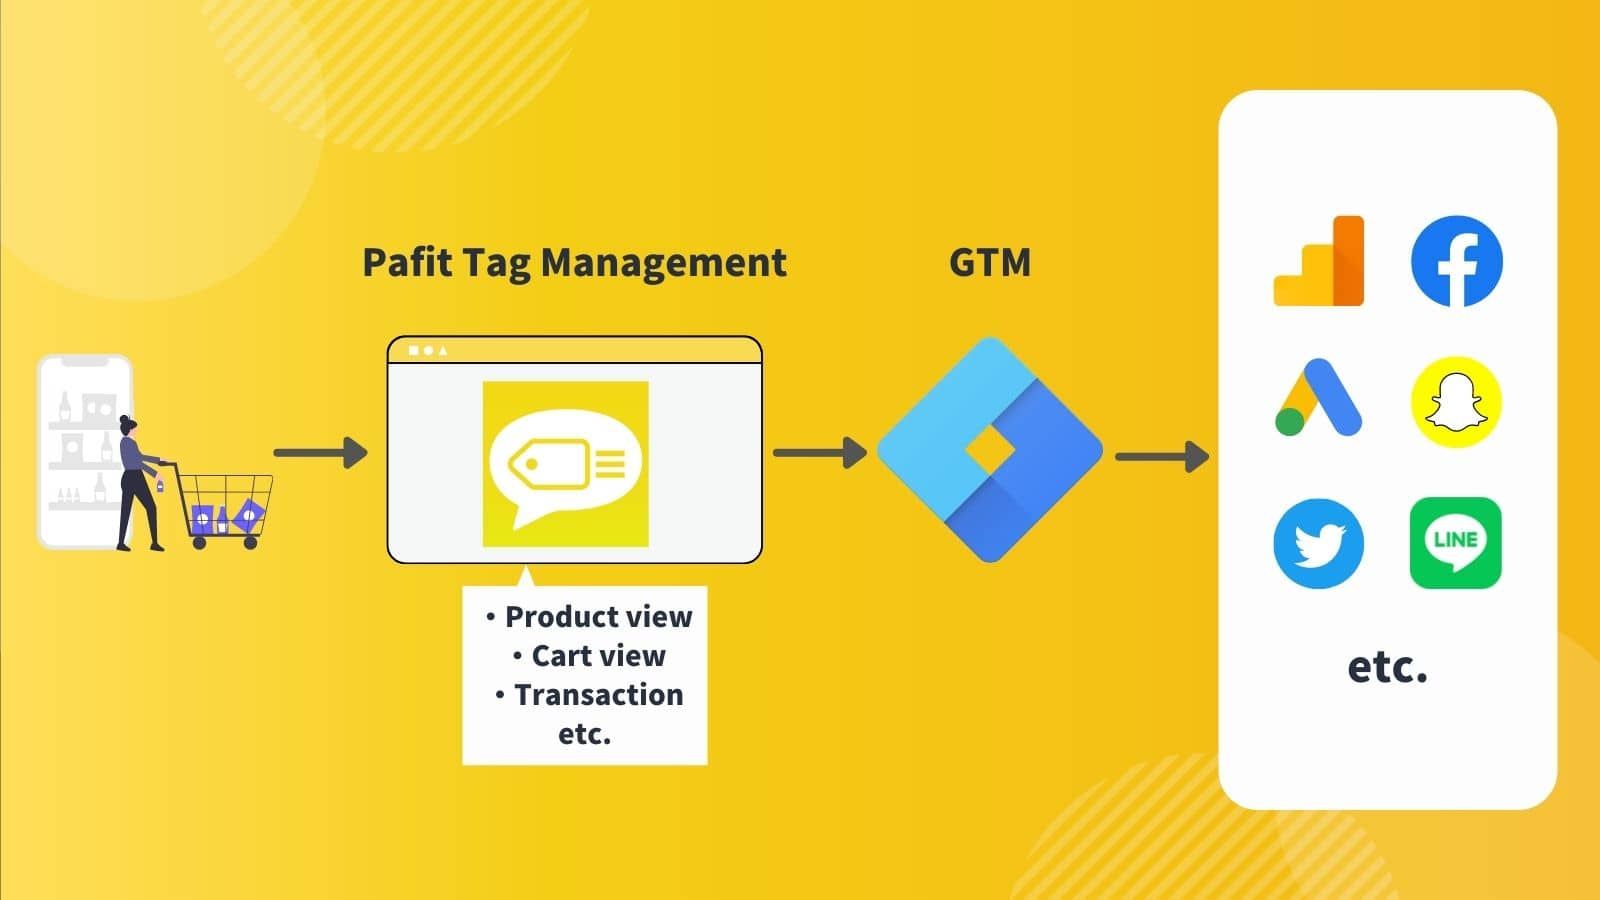 Pafit Tag Management for GTM Overview